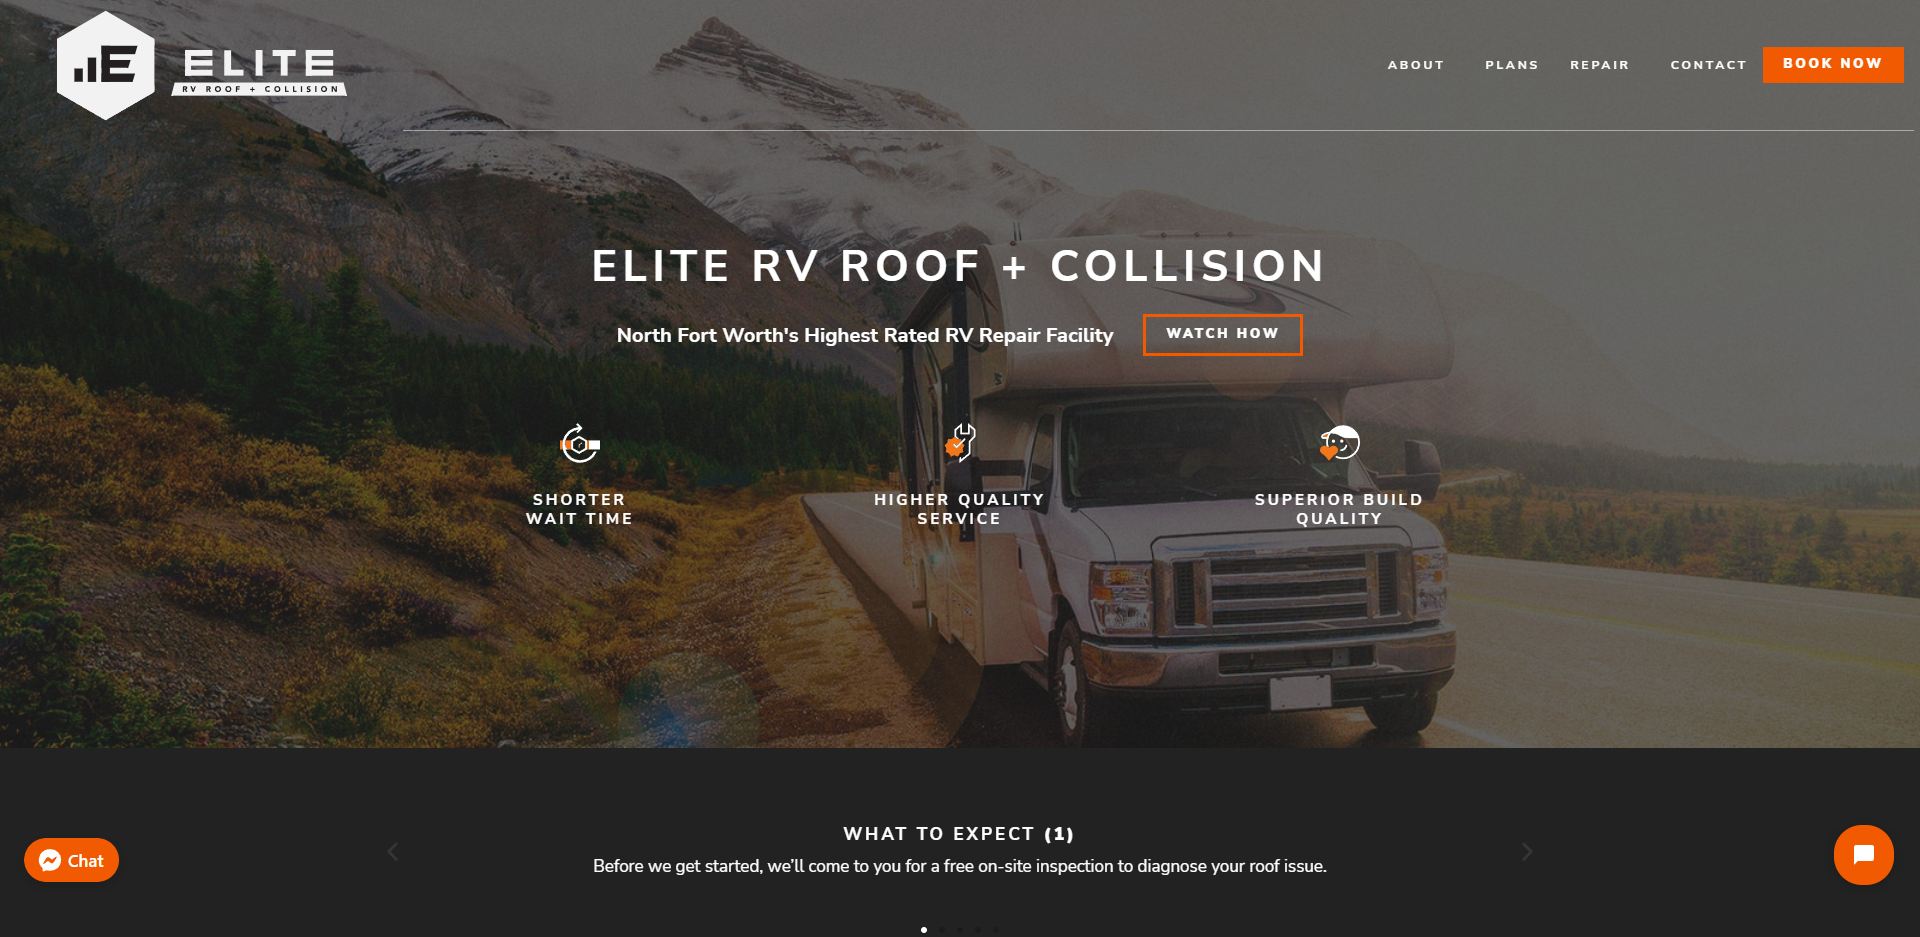 Elite RV Roof and Collision